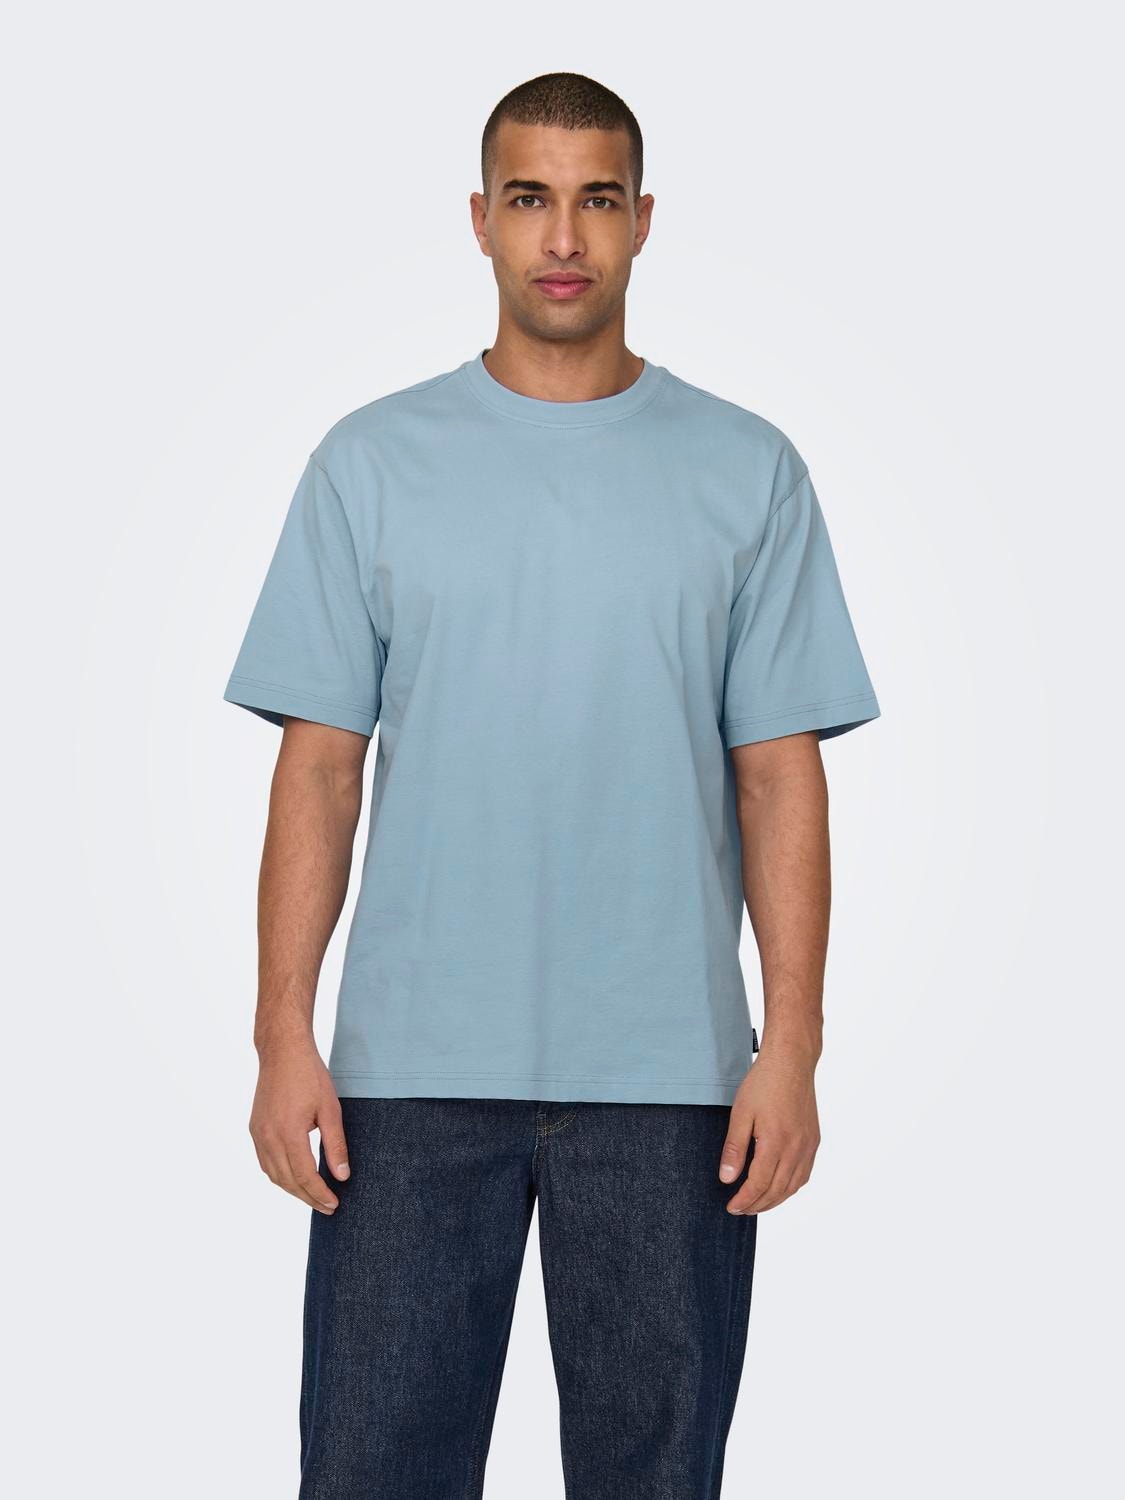 ONLY & SONS Relaxed fit O-hals T-shirts -Glacier Lake - 22022532